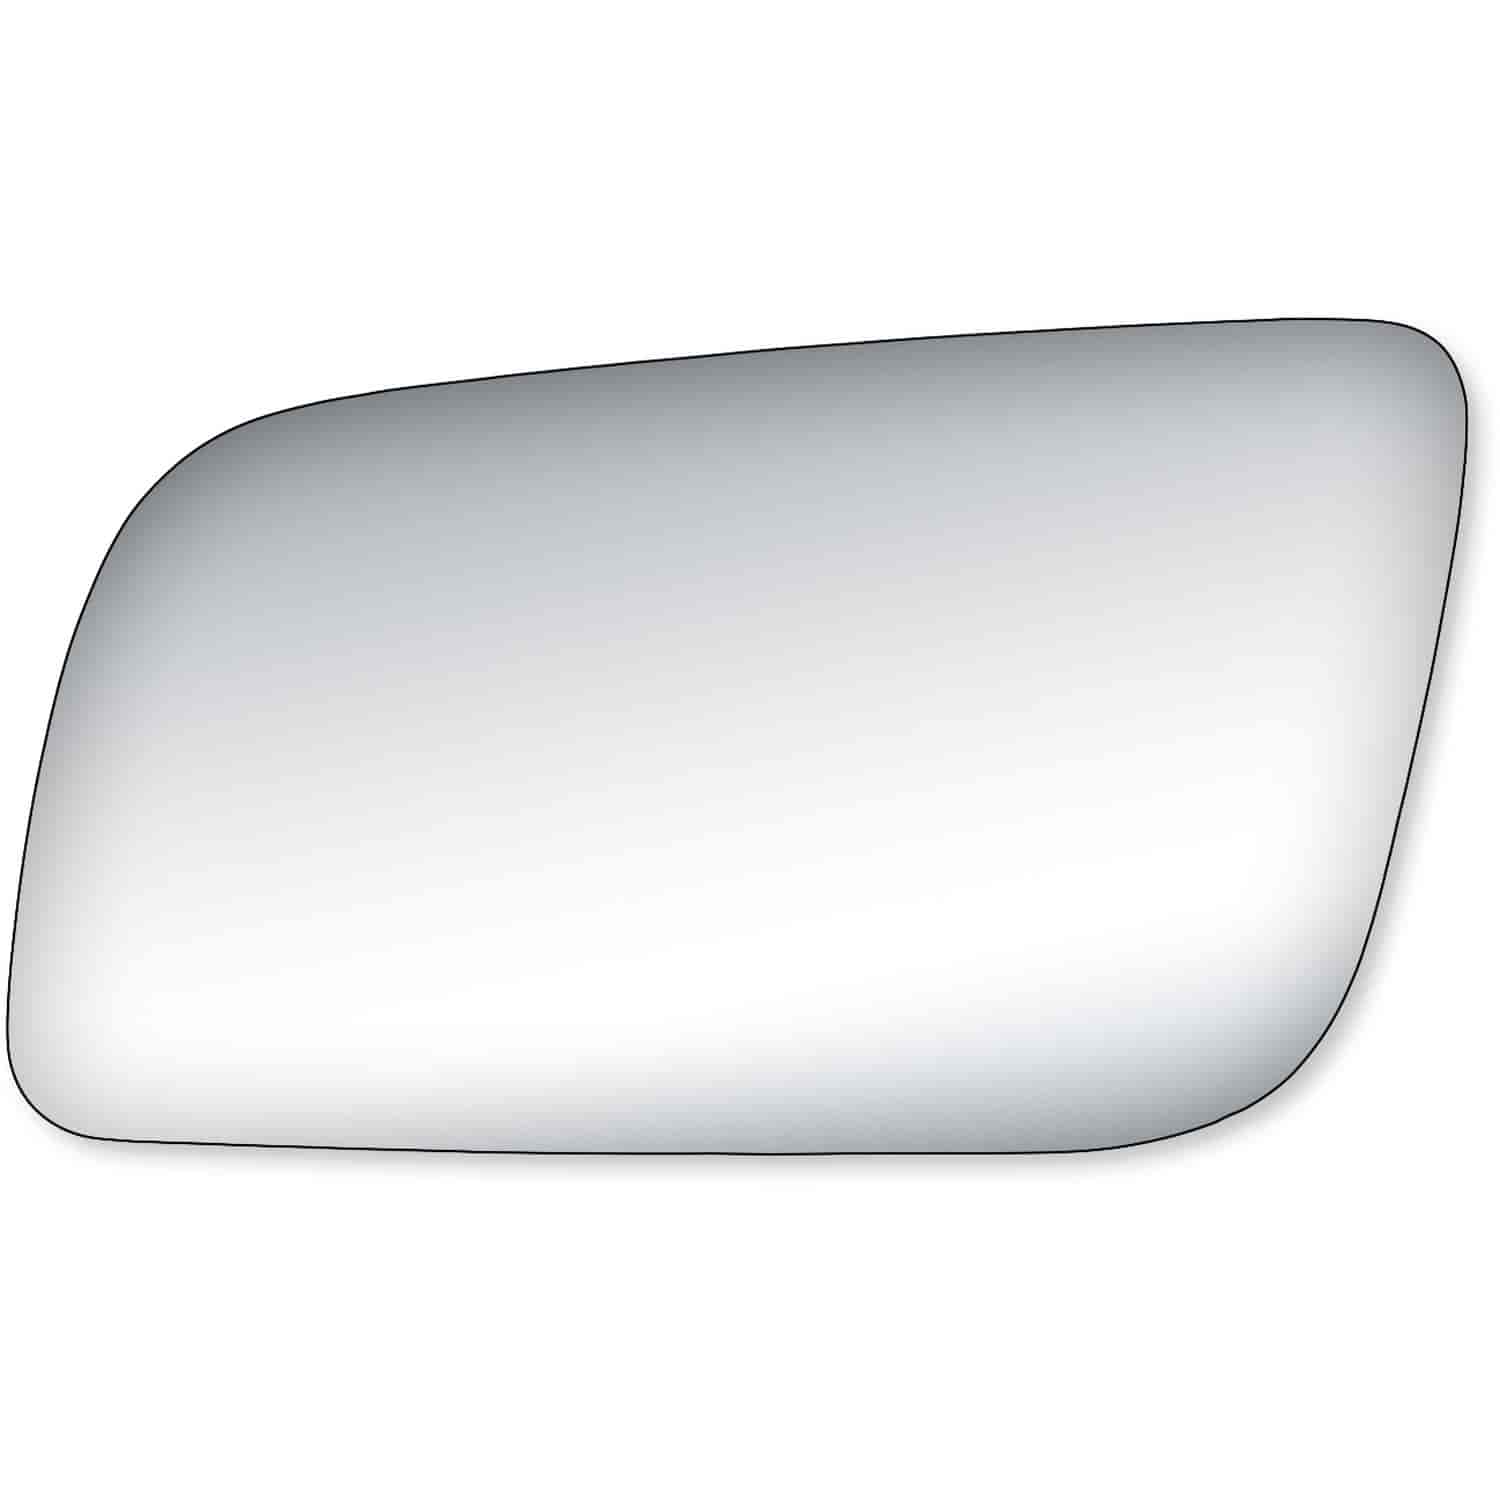 OE Replacement Glass Fits 1988 to 1998 GM Full Size Pickup & 1988 to 2005 Chevy Astro/GMC Safari